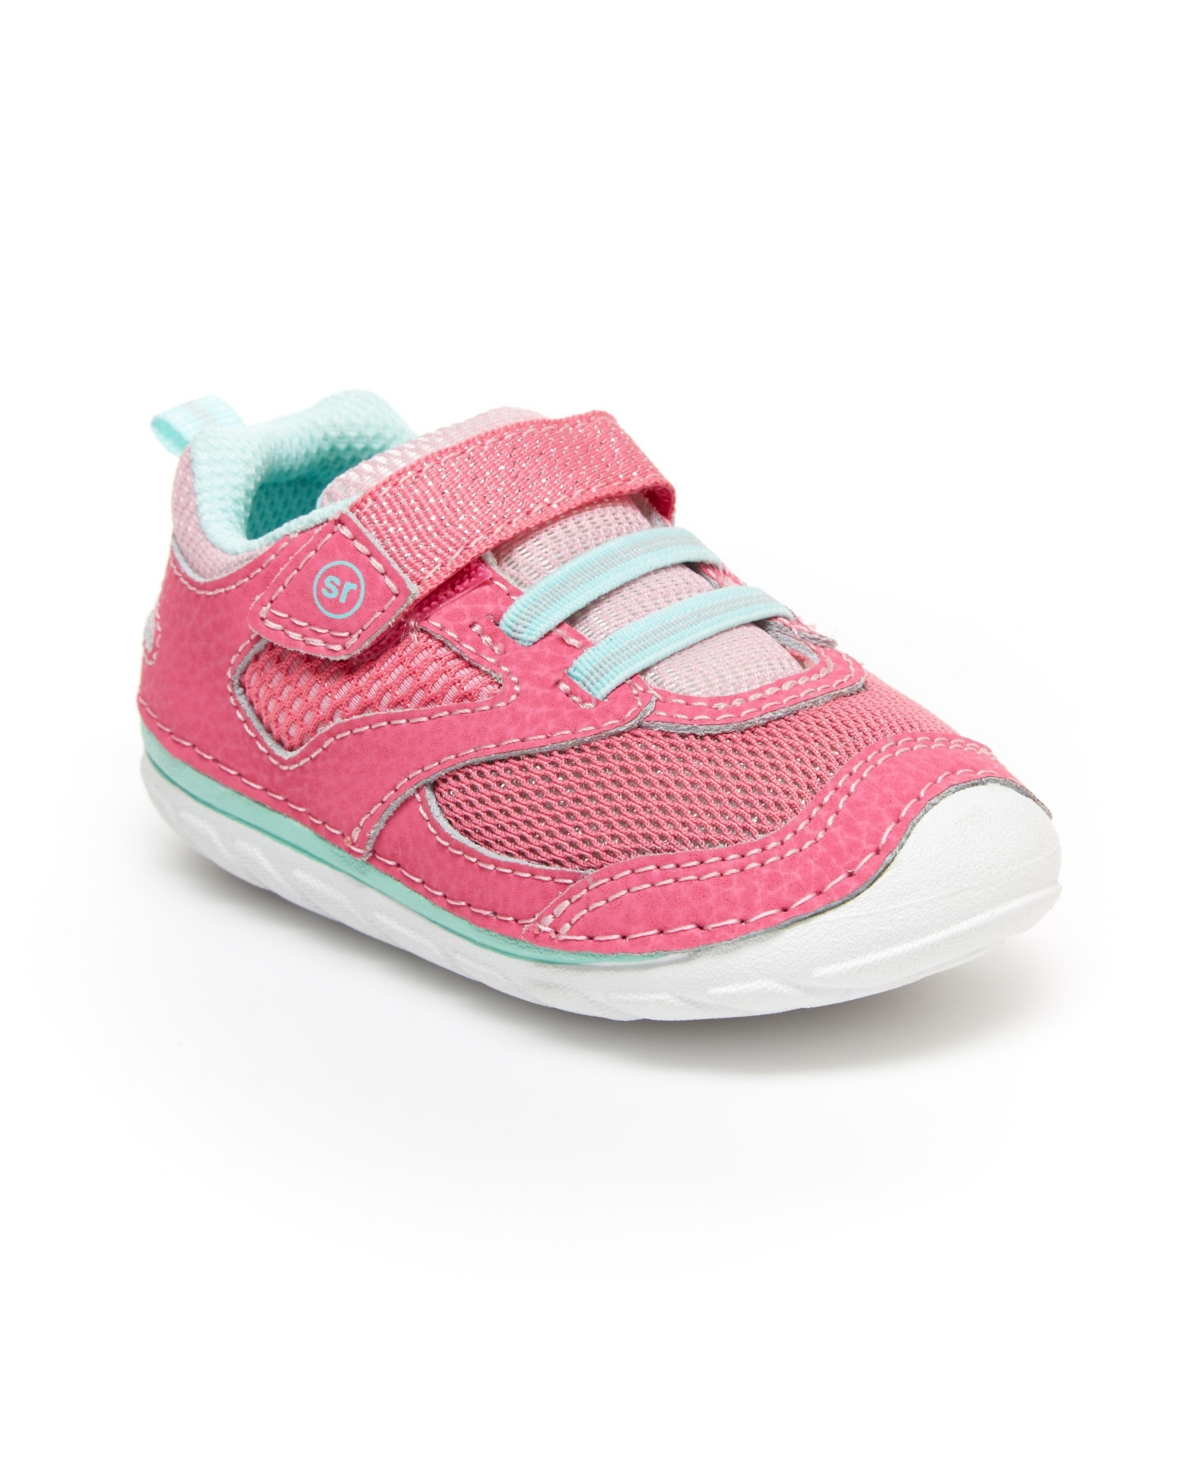 Stride Rite Toddler Girls Sm Adrian Athletic Shoes